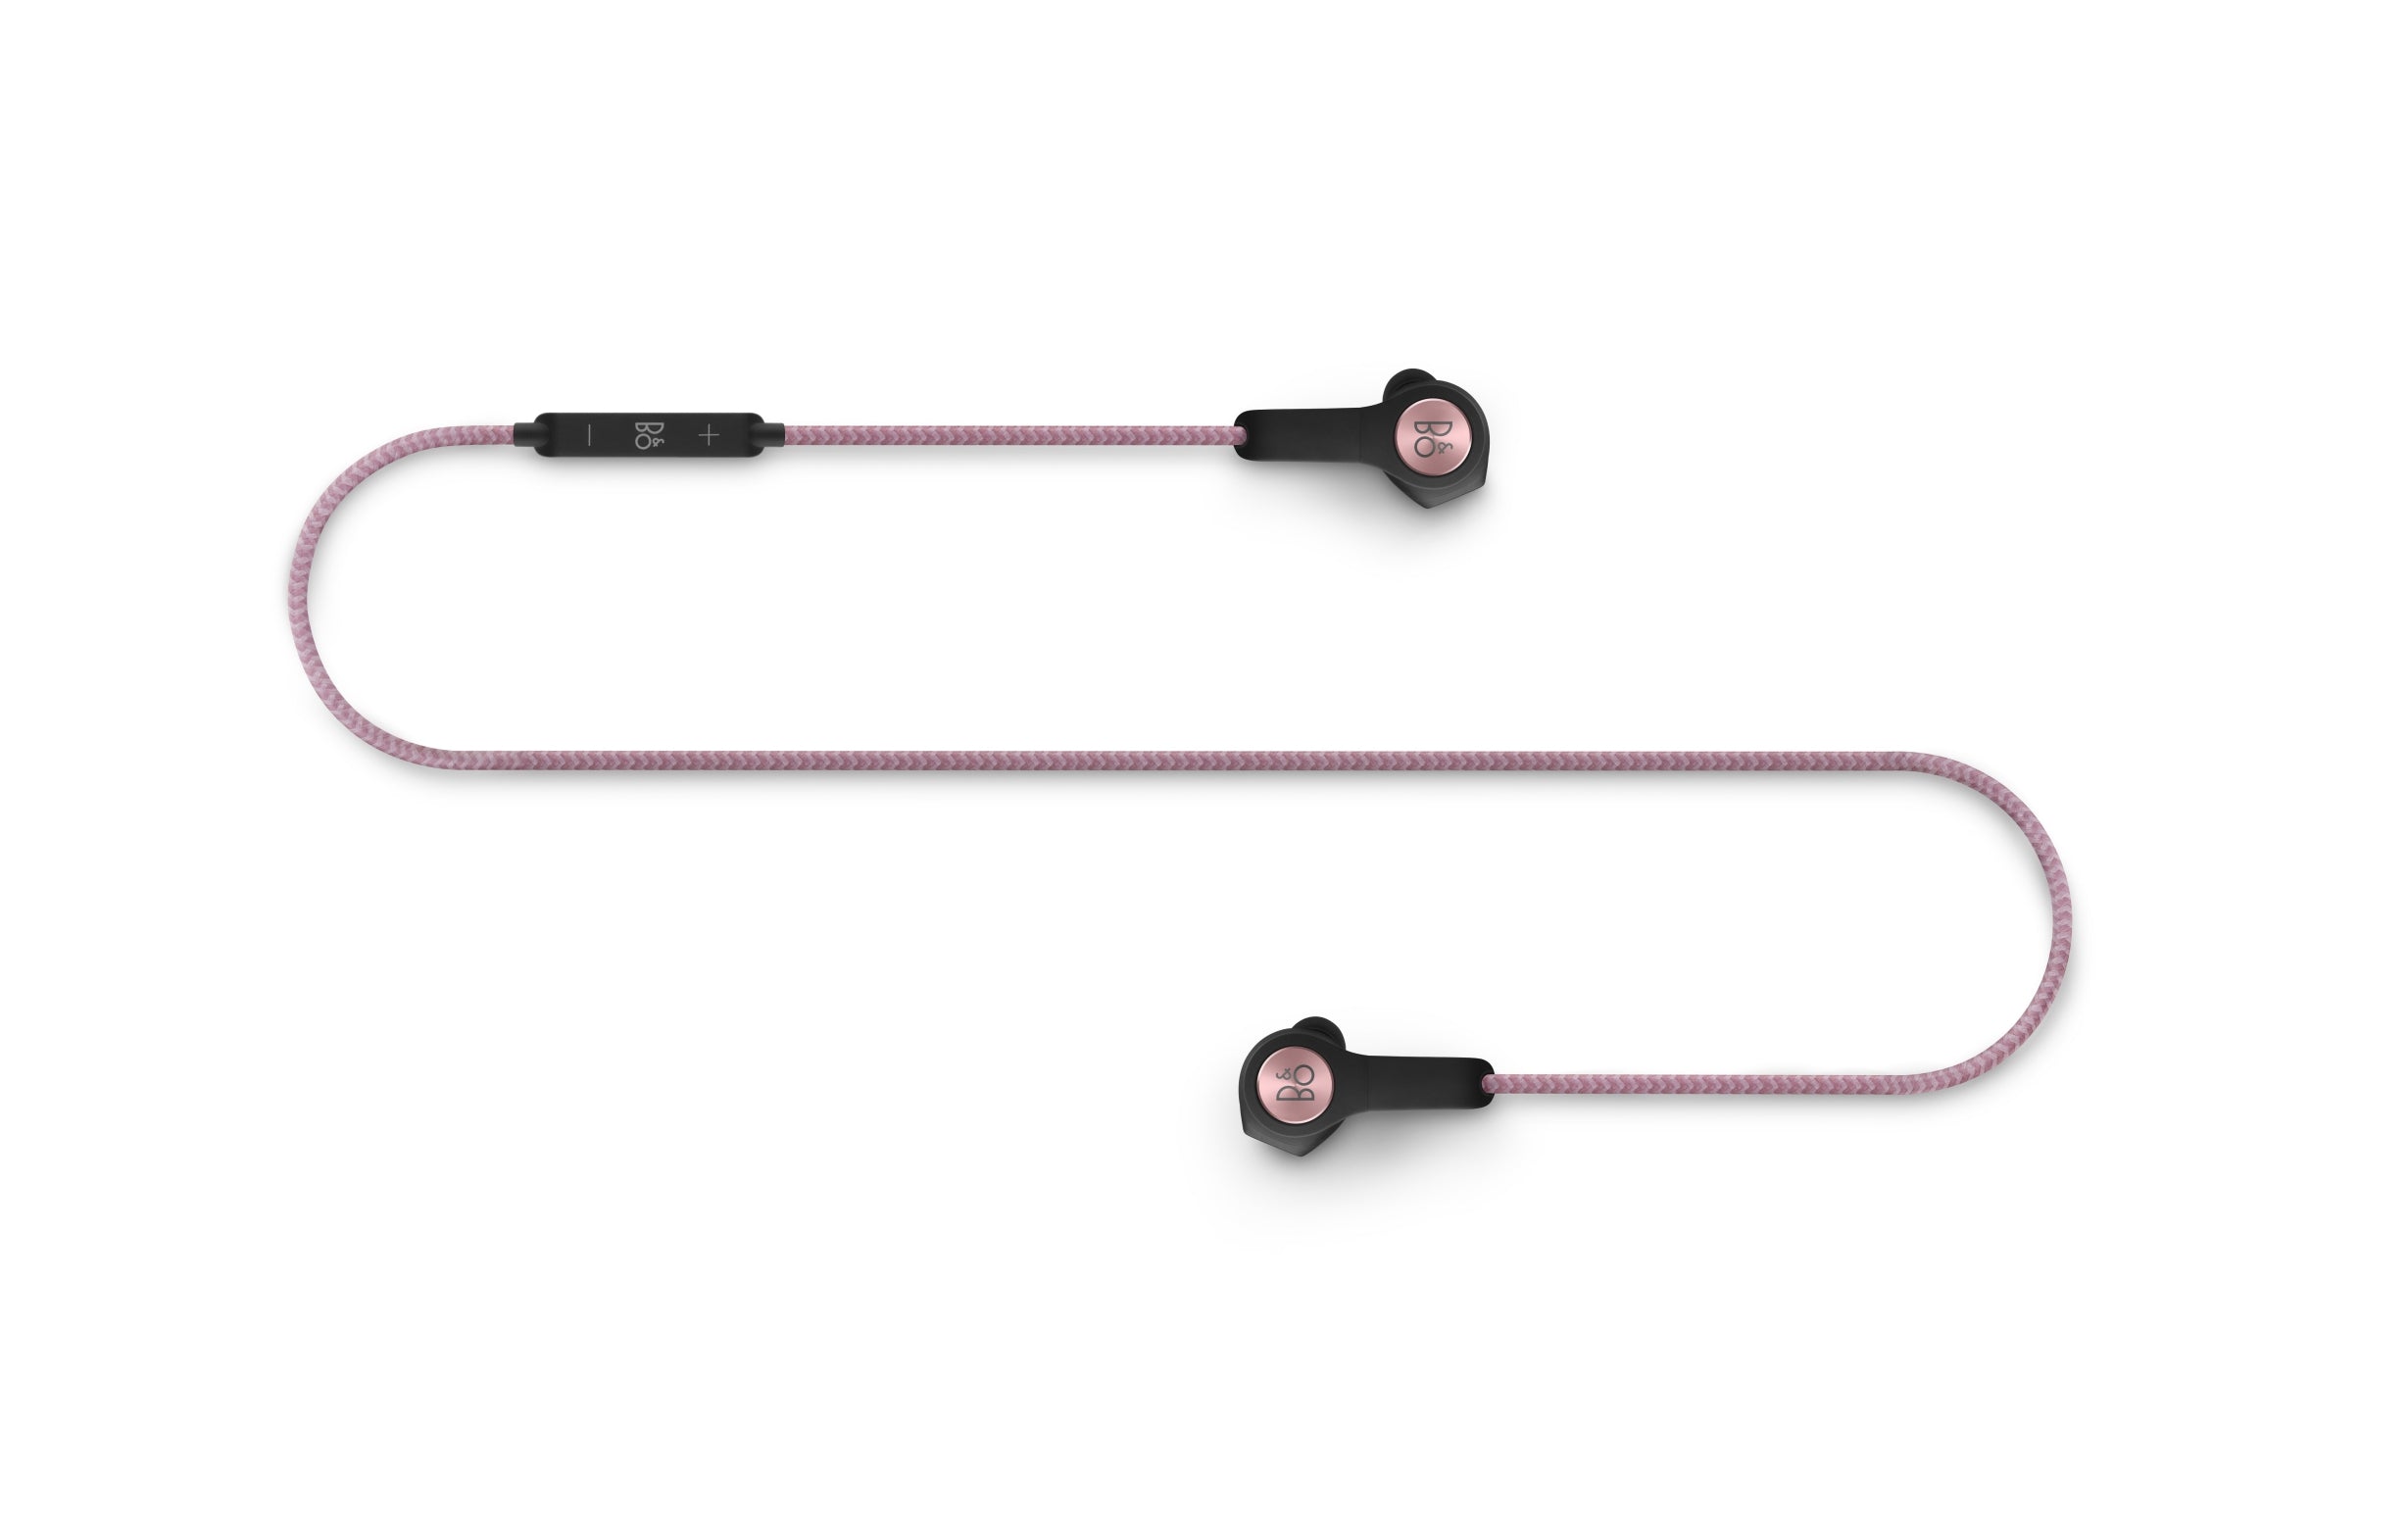 Bang & Olufsen Beoplay H5 Splash and Dust Proof Wireless Earphones rose color